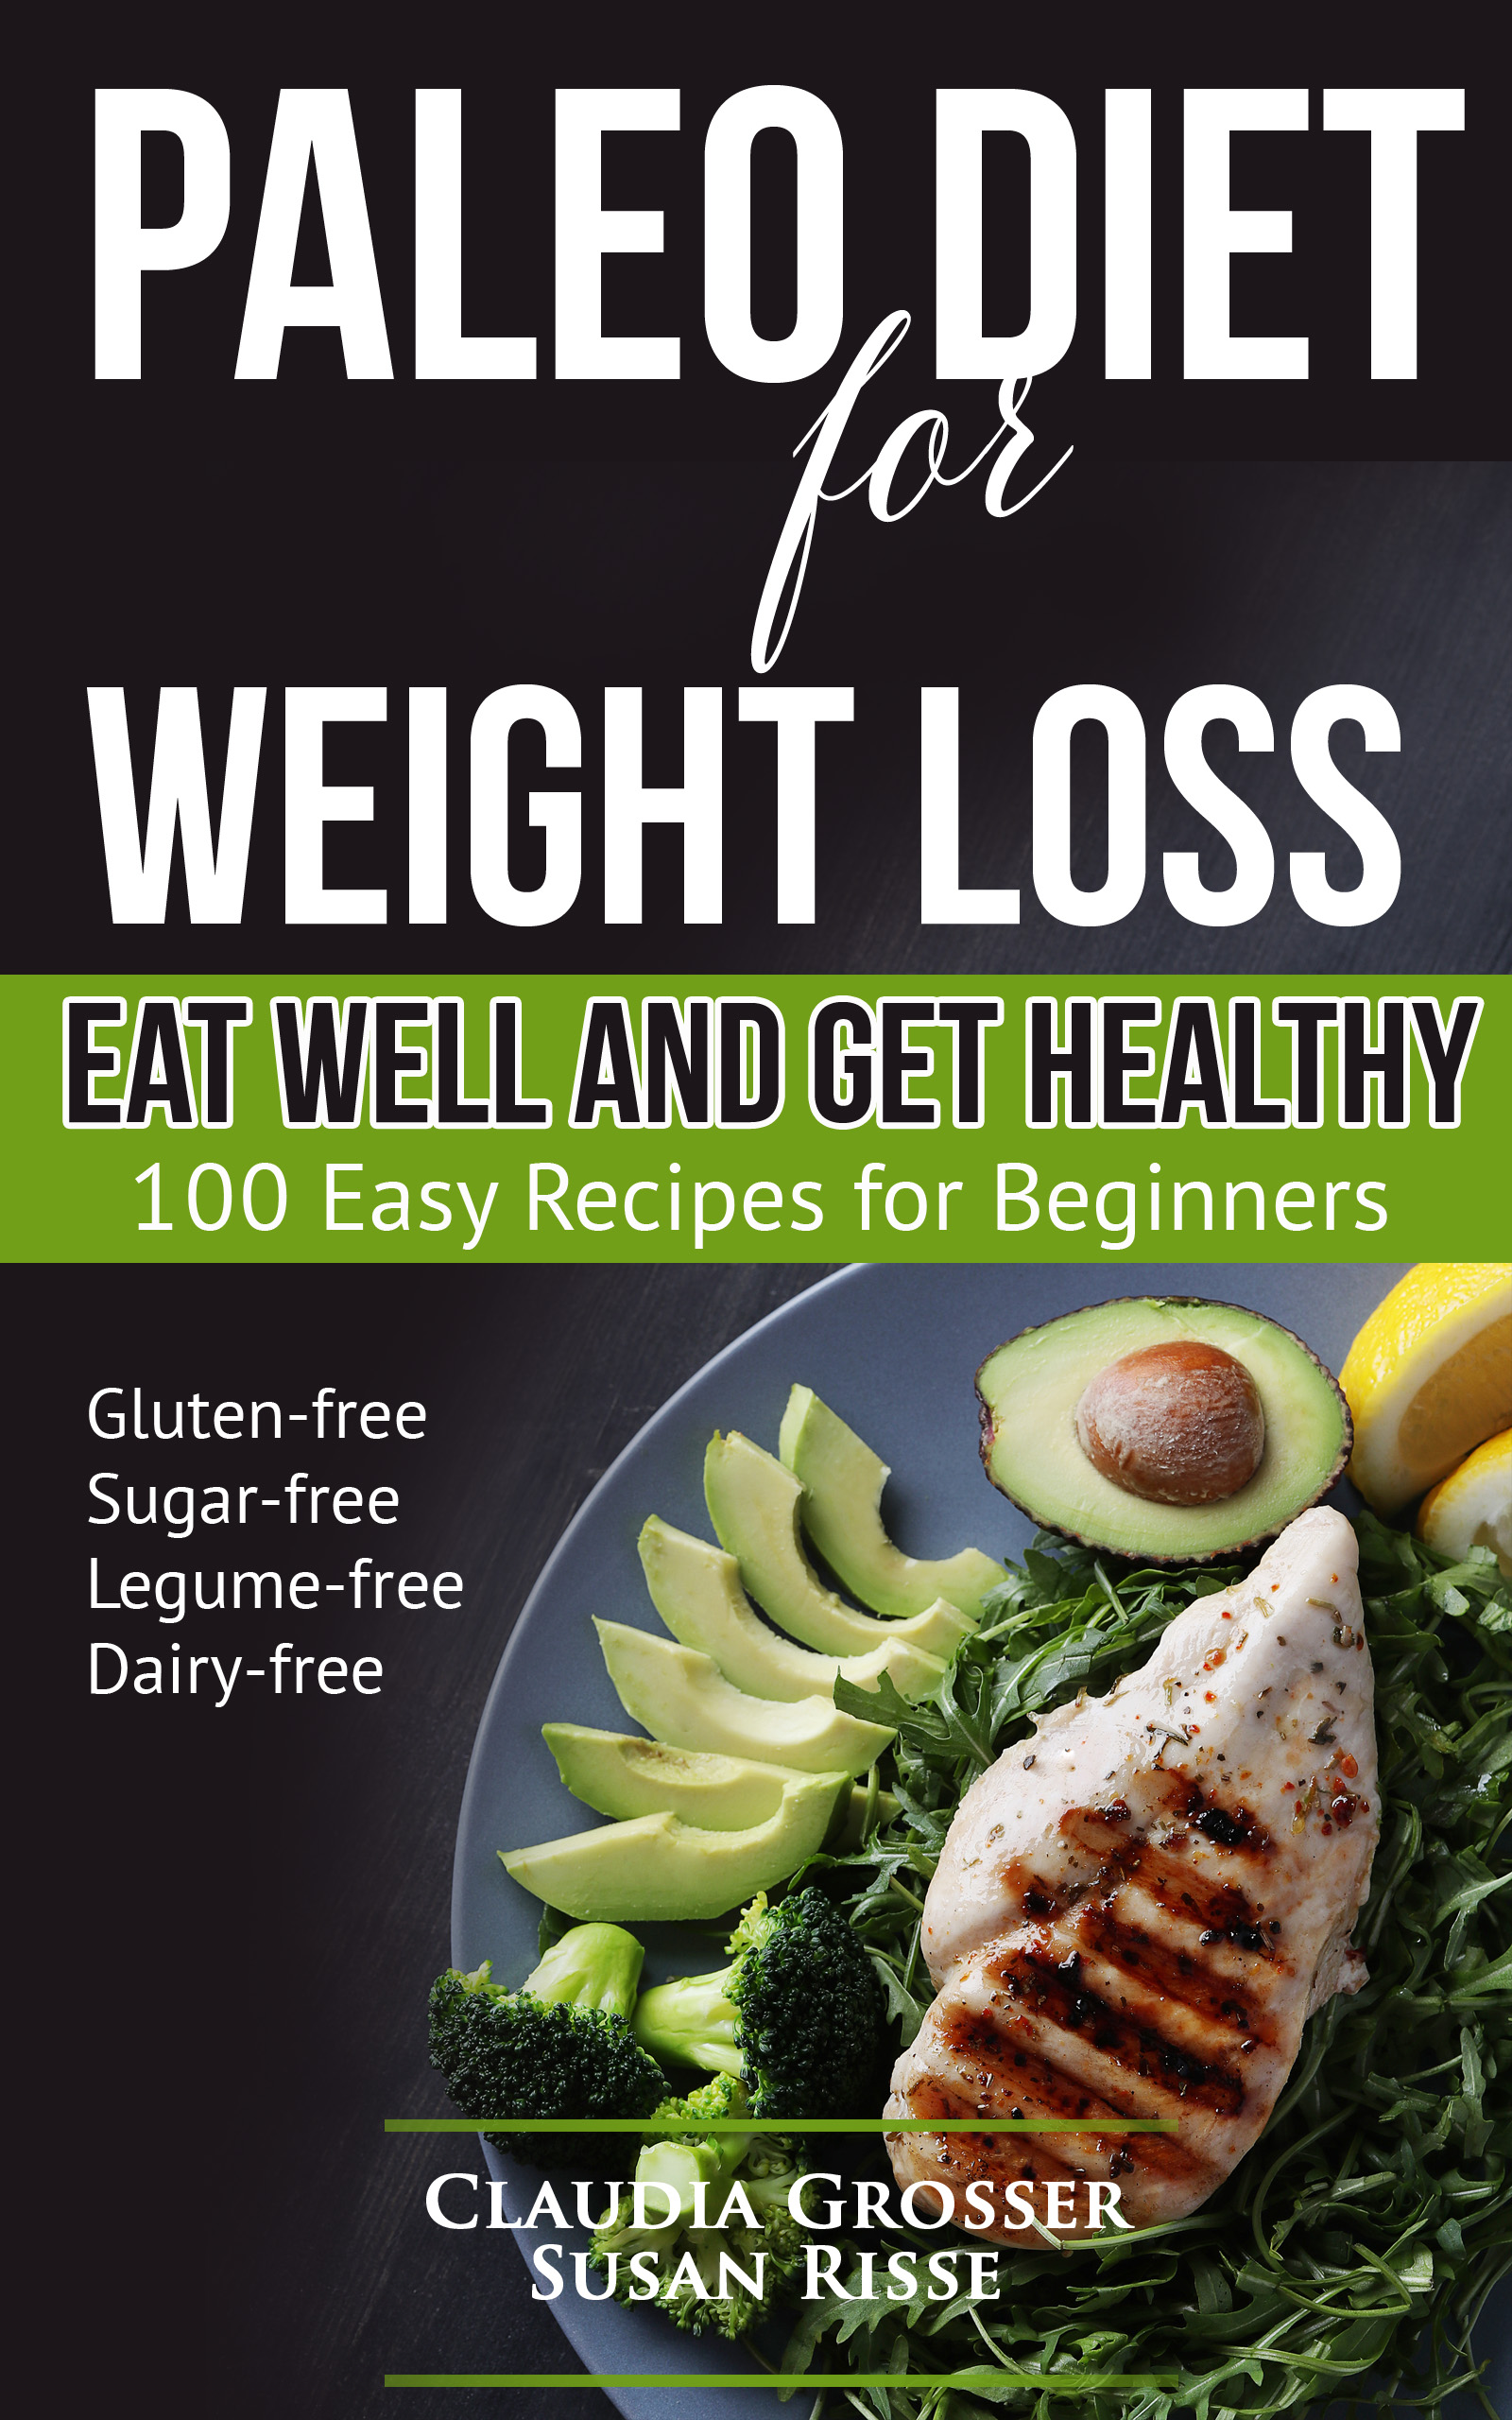 FREE: Paleo Diet for Weight loss Eat Well and Get Healthy: 100 Easy Recipes for Beginners (gluten-free, sugar-free, legume-free, dairy-free) by Claudia Grosser, Susan Risse